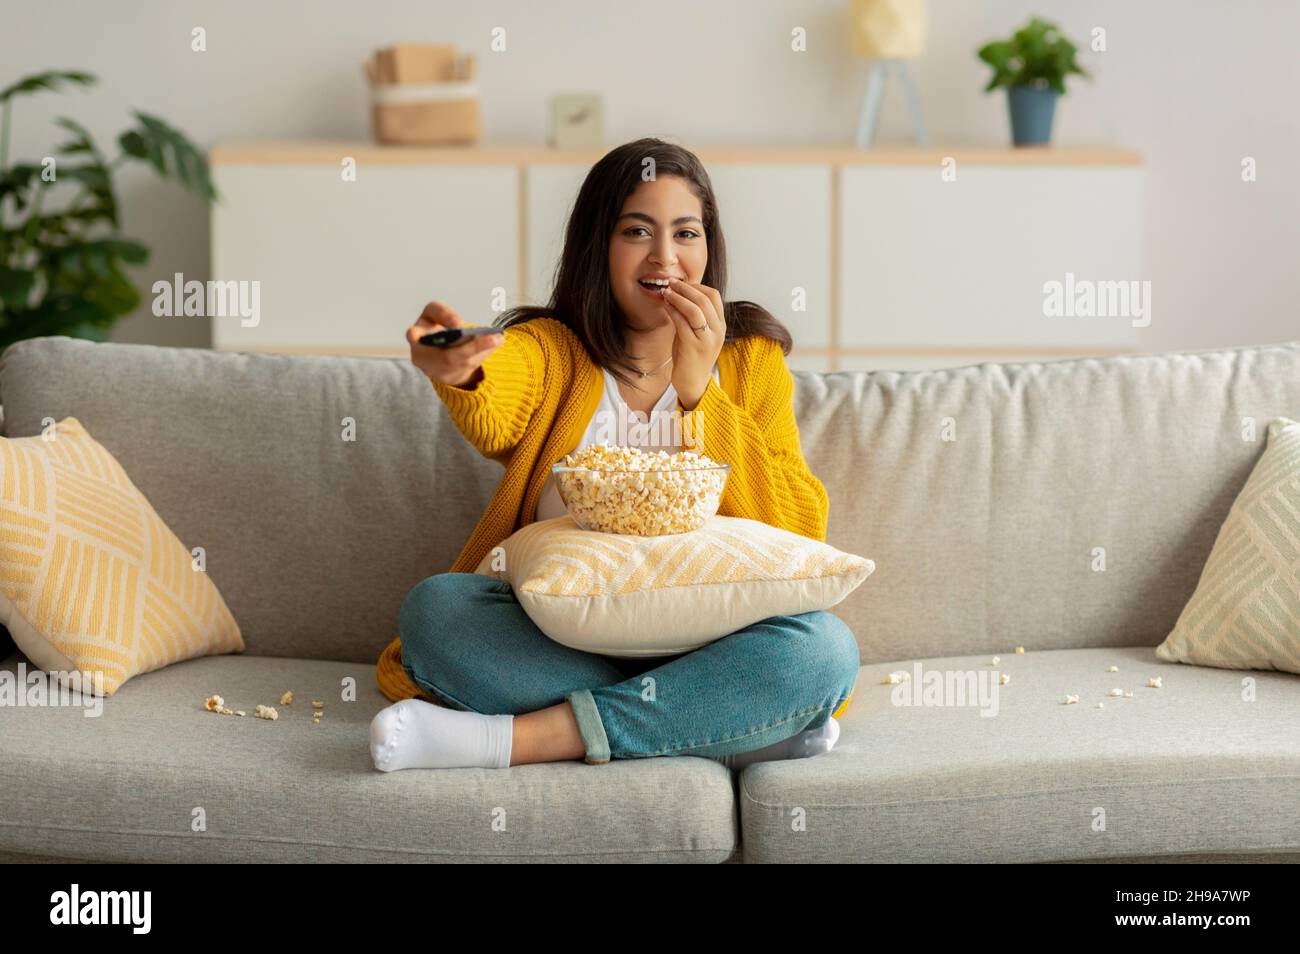 Young arab woman sitting on couch with TV remote, choosing movie to watch and eating popcorn, enjoying free time Stock Photo